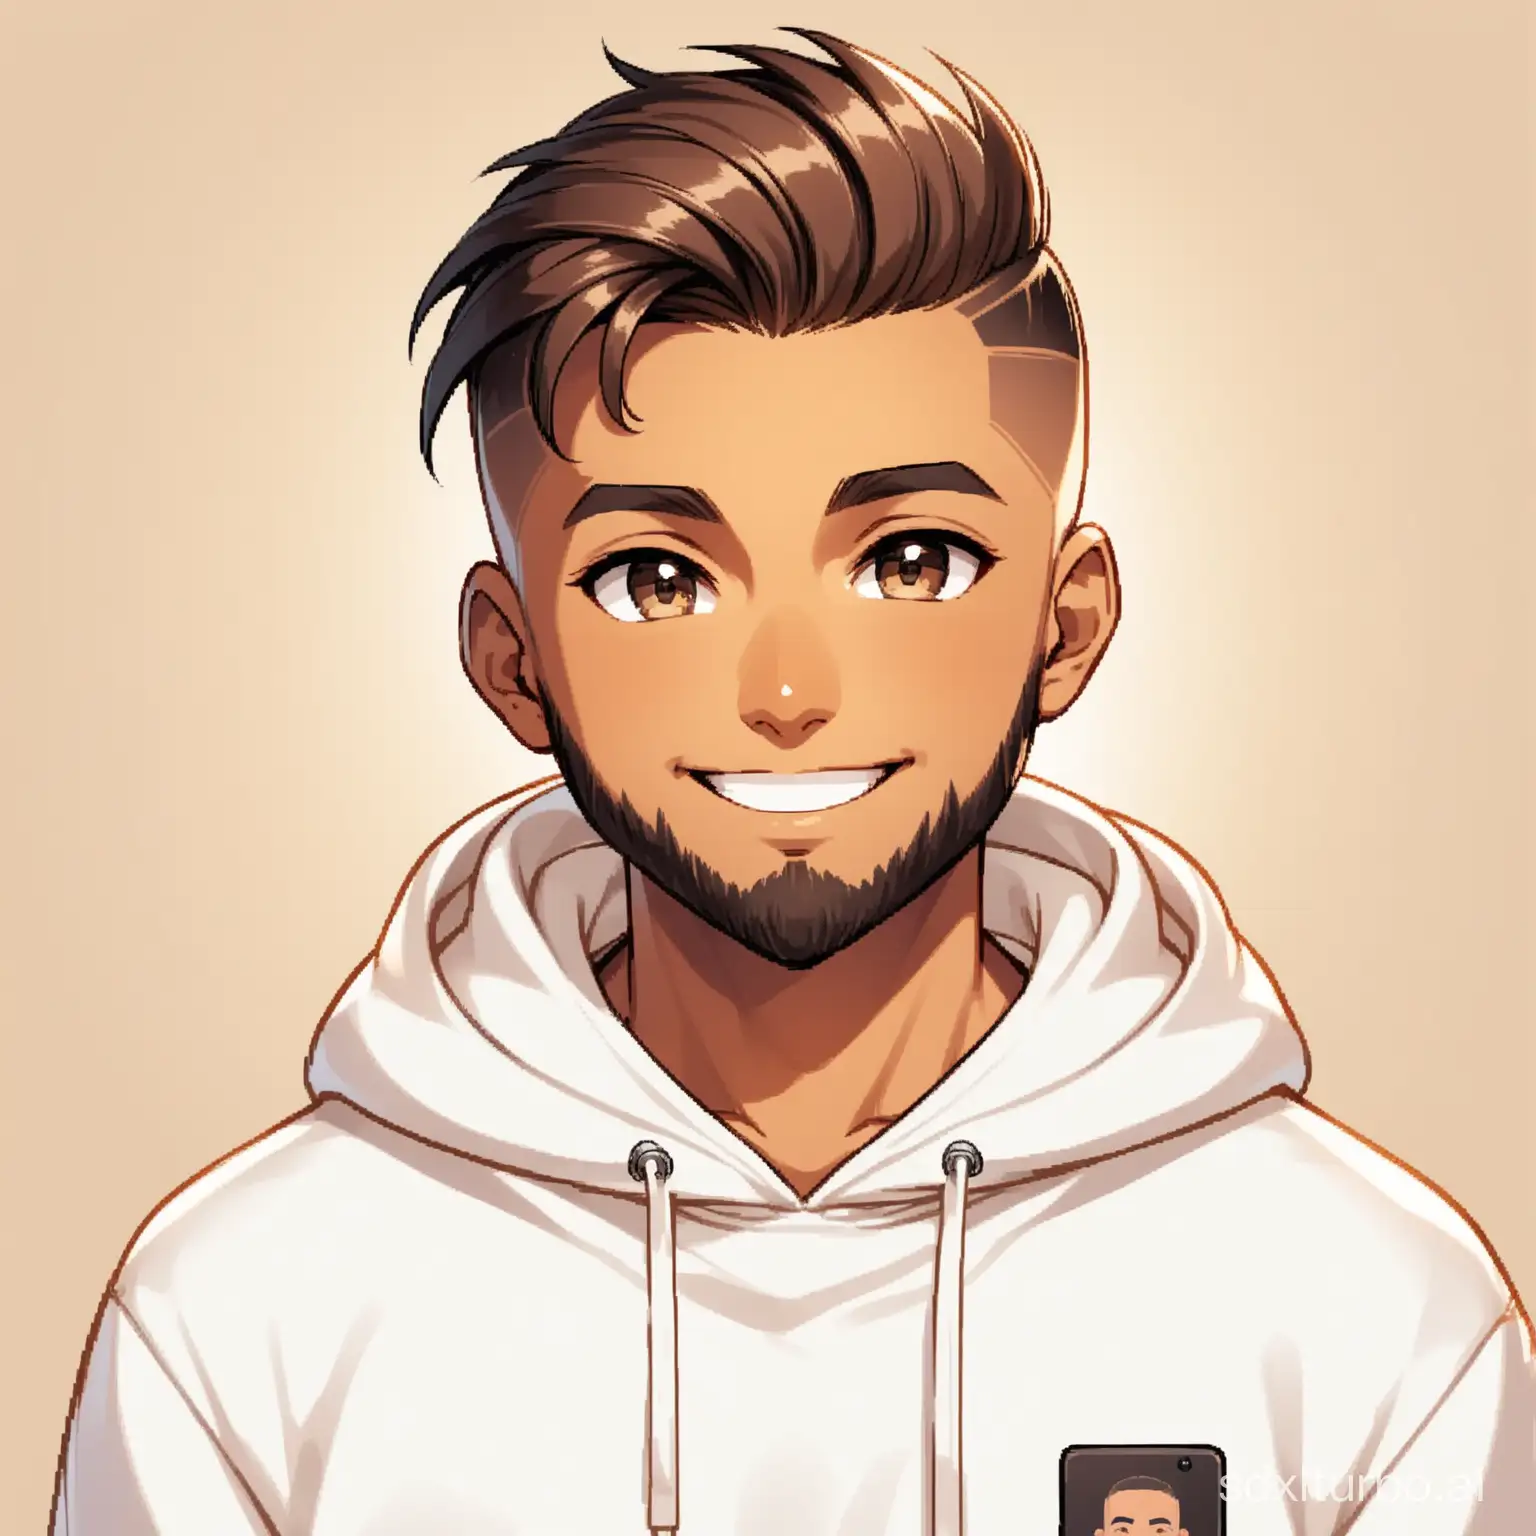 Generate an image featuring a brown-white-skinned developer with dark eyes, an undercut hairstyle, a round face, and a light beard, wearing a white hoodie and a smile on his face and looking in front standing straight with hands inside the hoodie pocket.